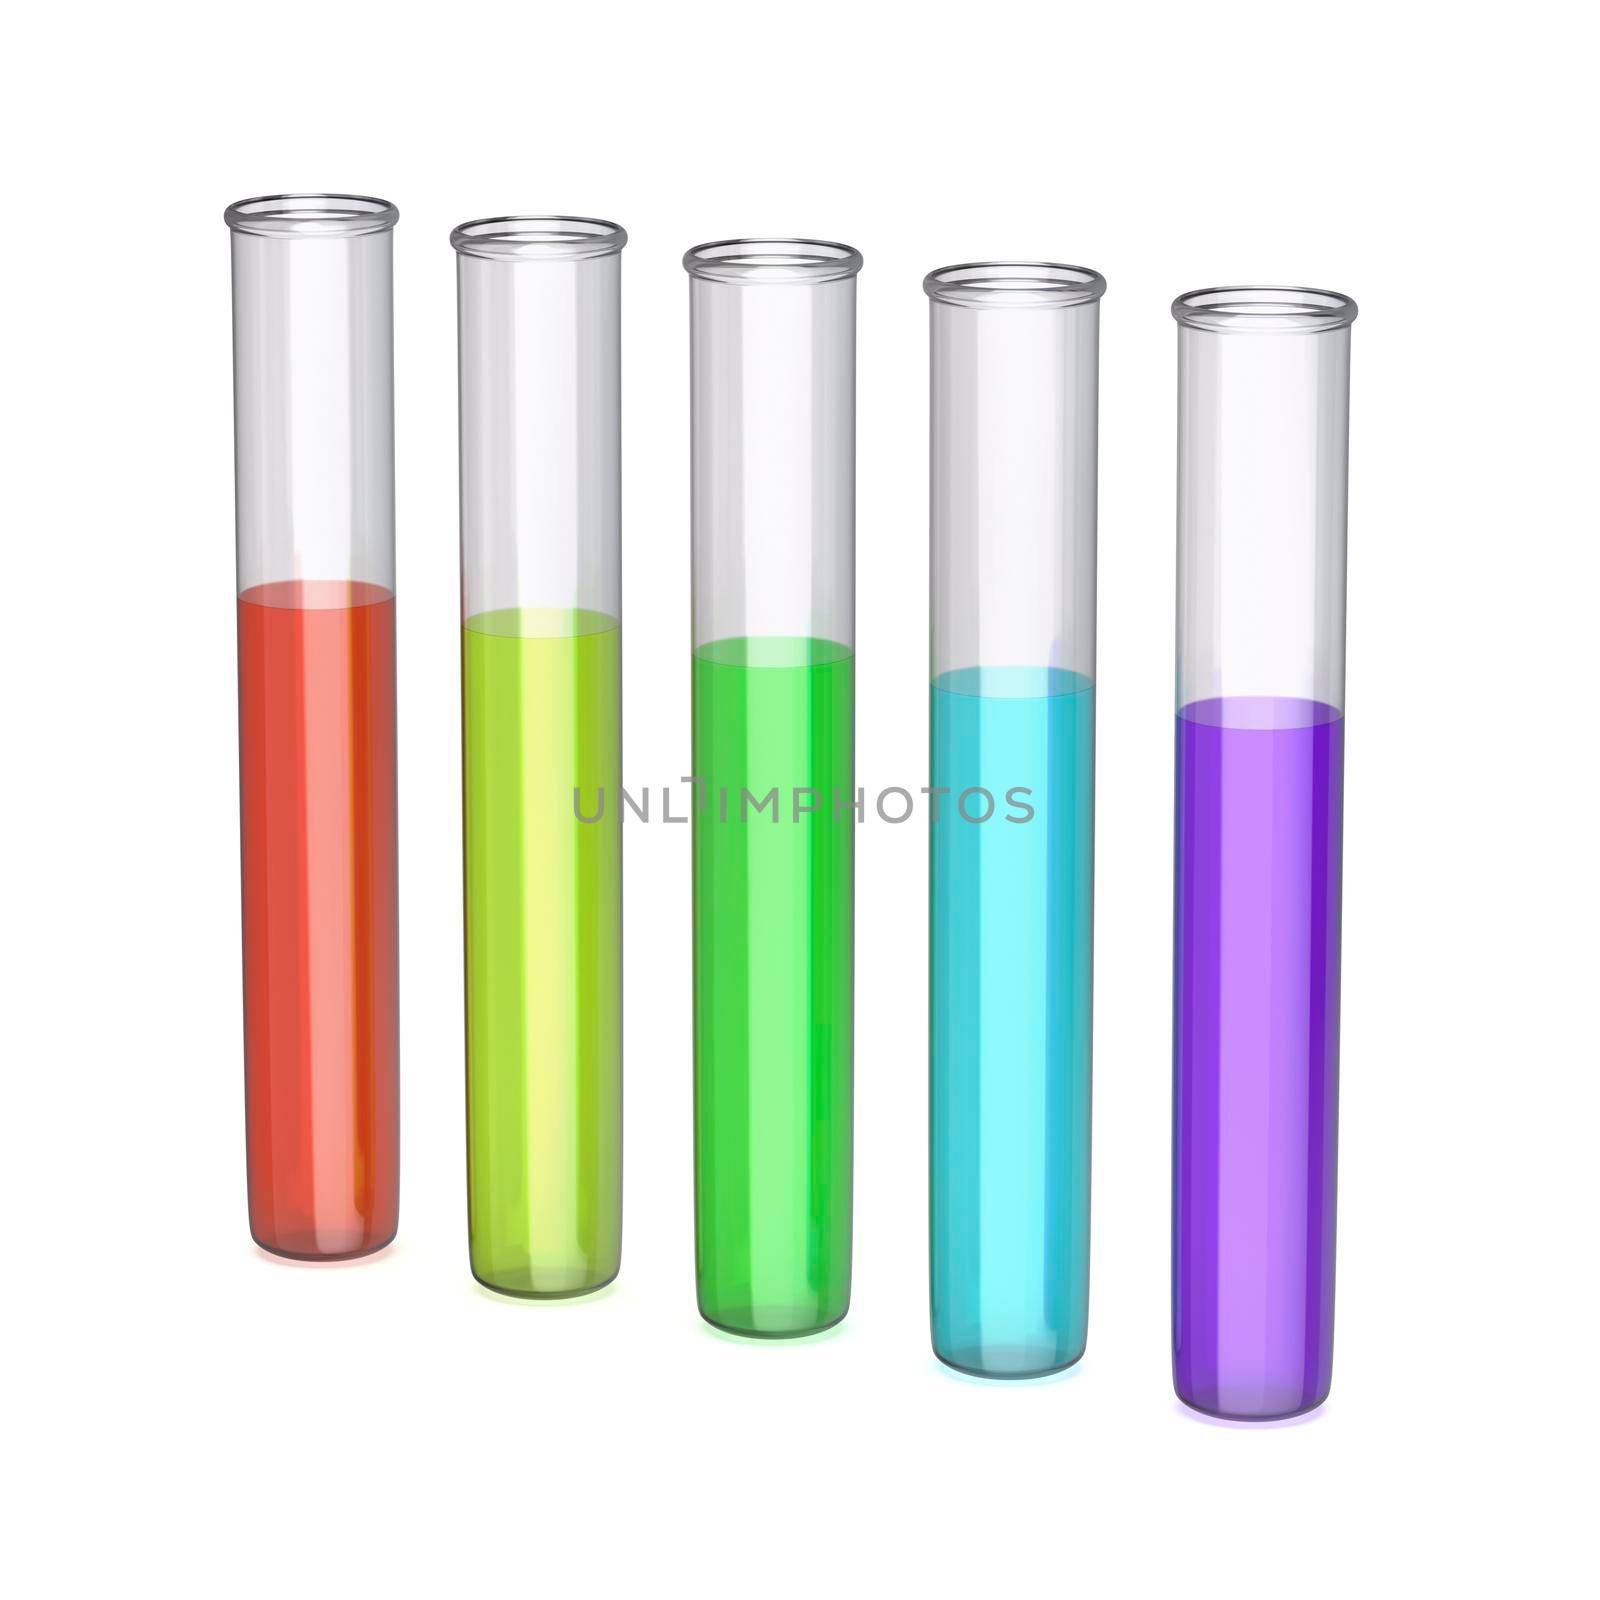 Colored liquids in test tubes on white background